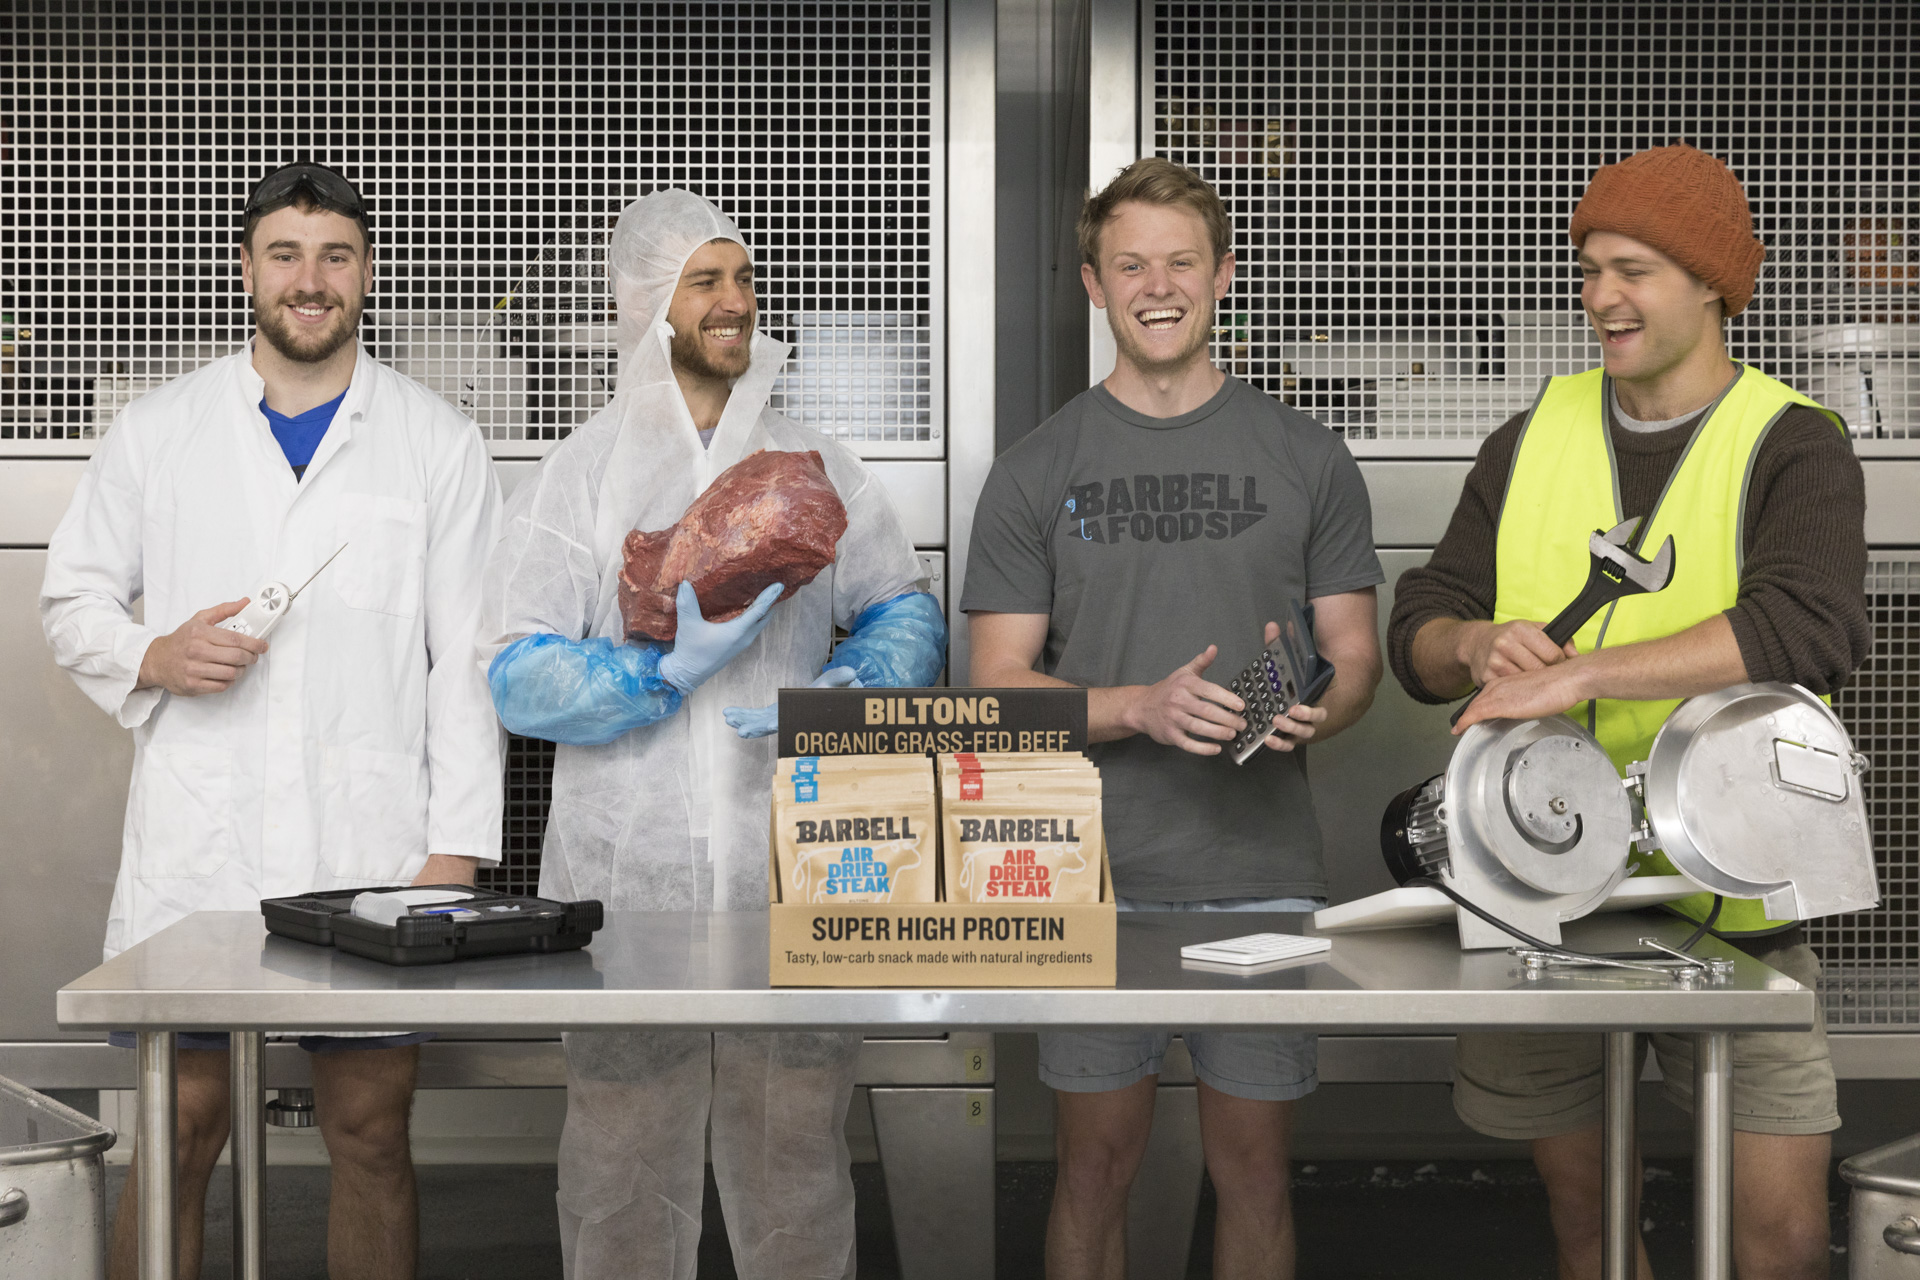 Heavy lifting starts for Canberra's biltong boys